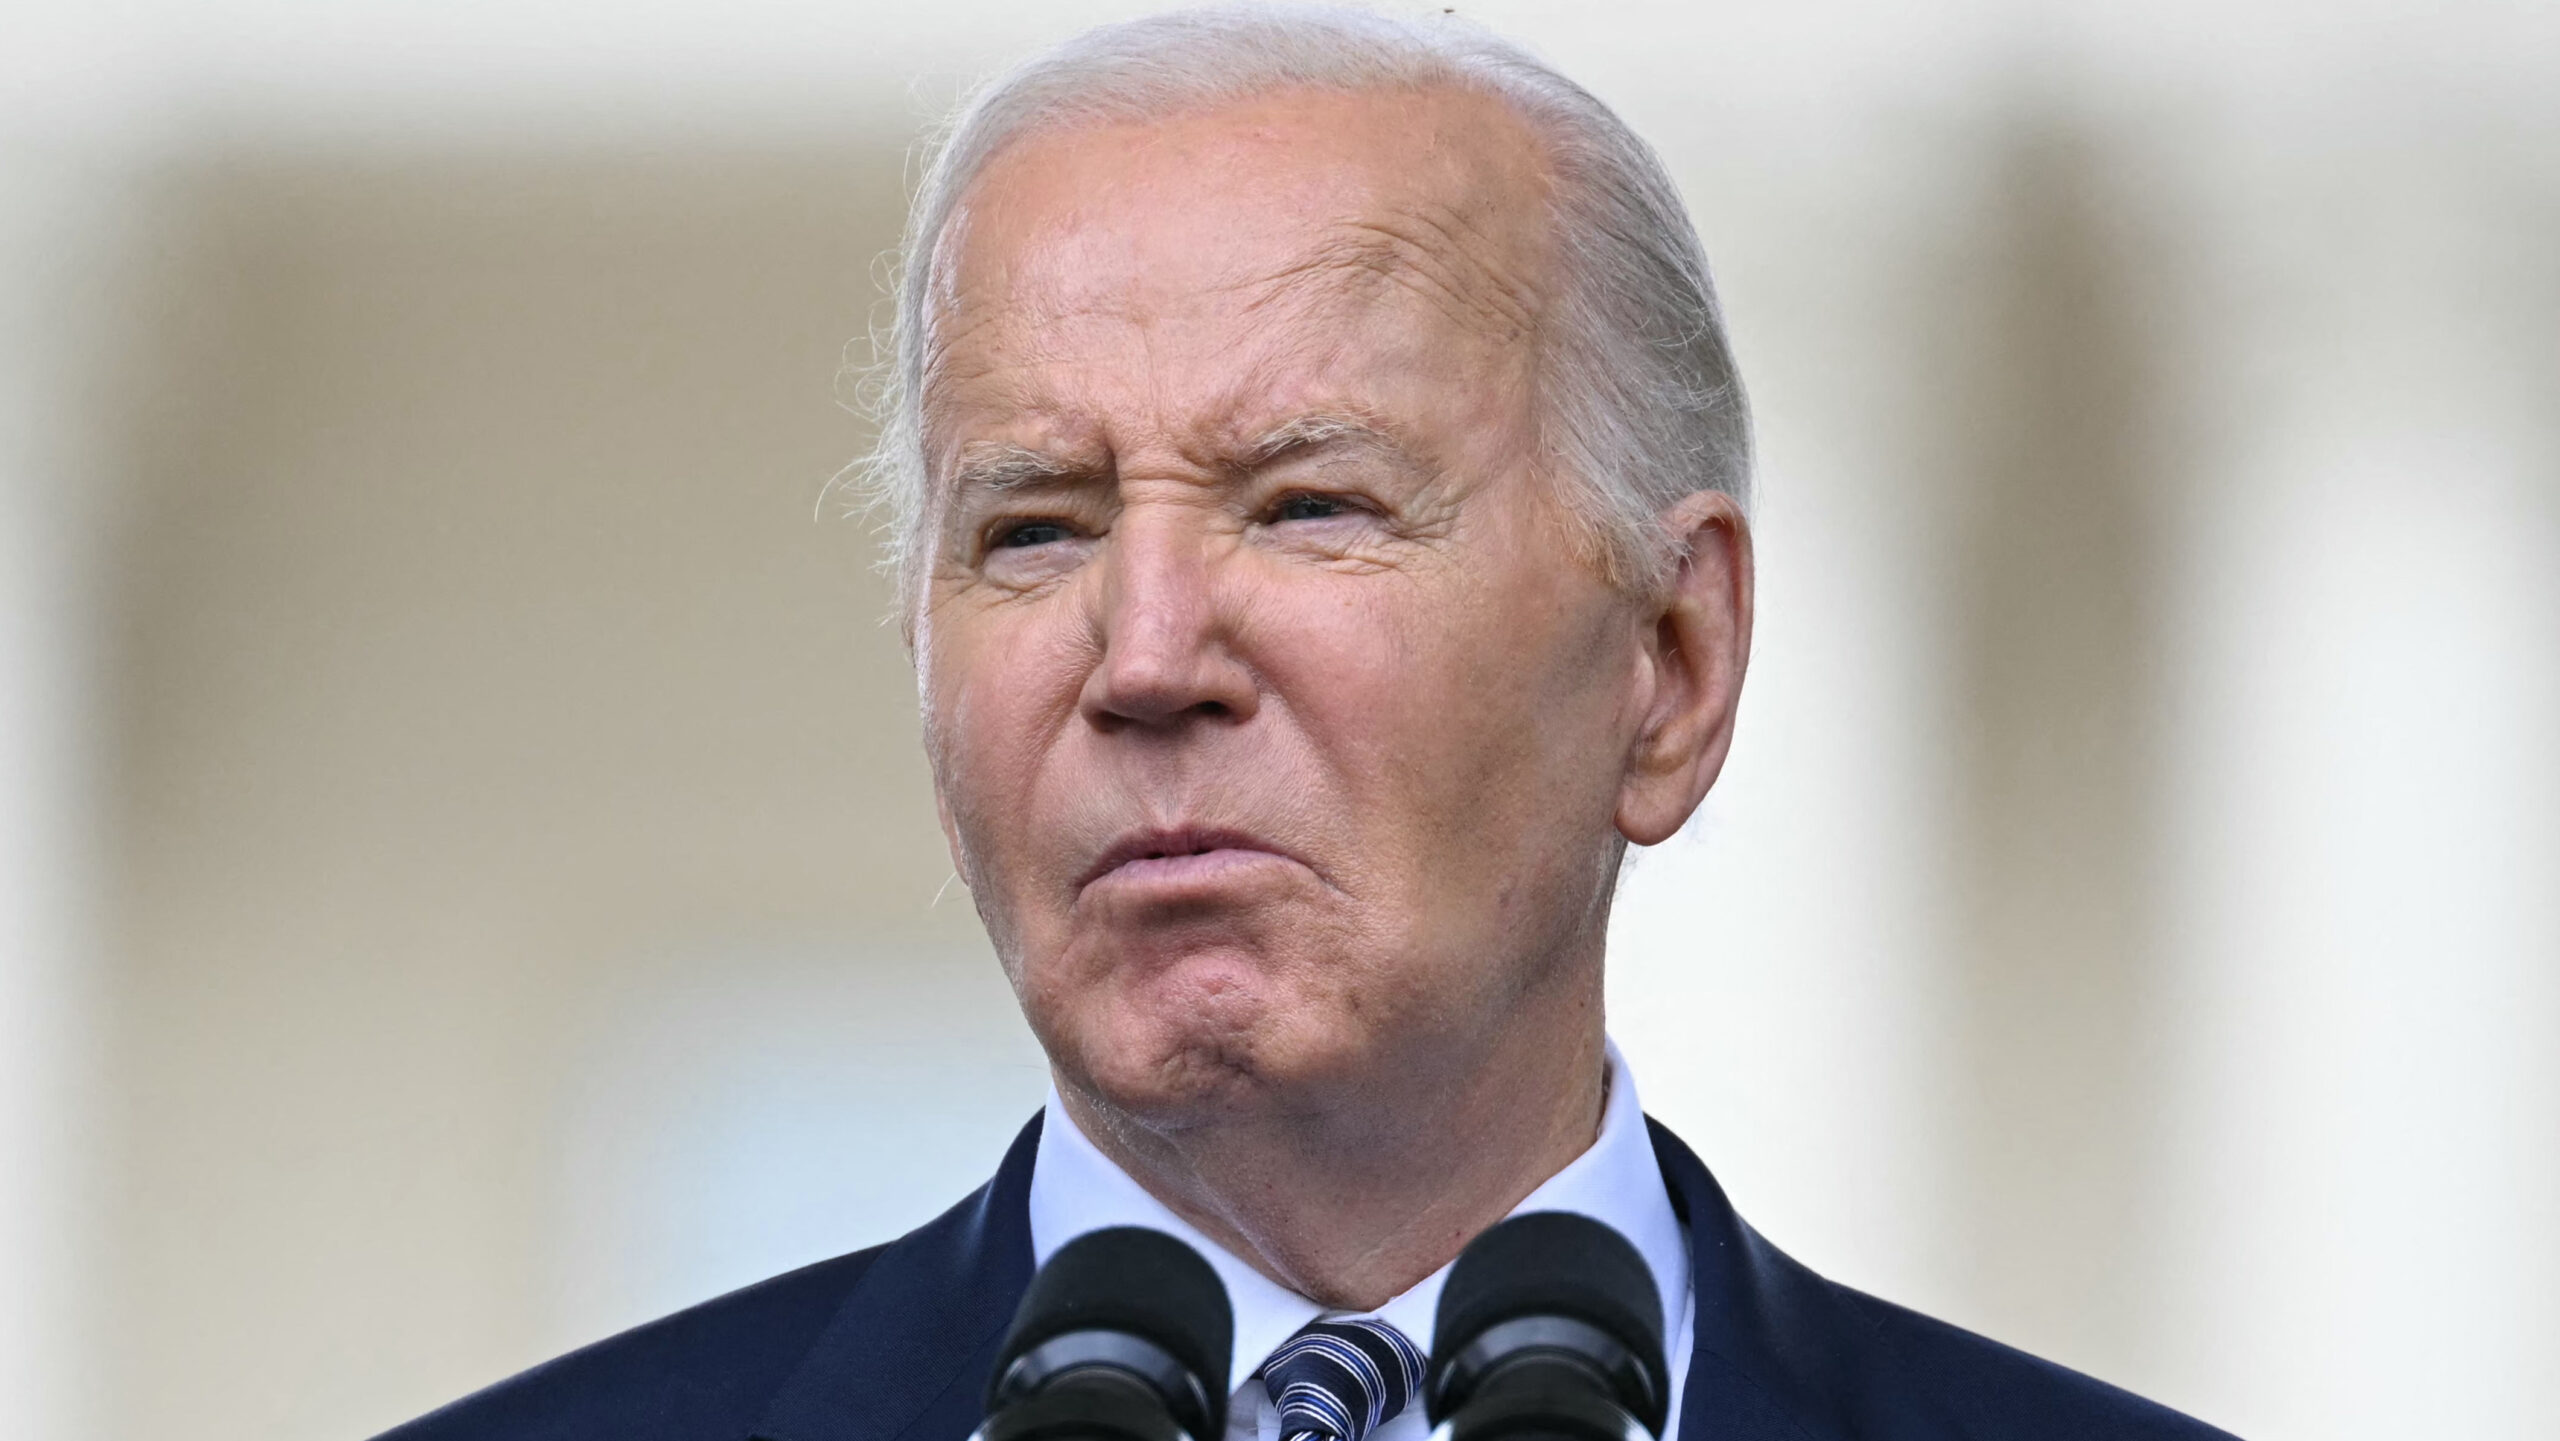 Biden Approves Ukrainian Use of U.S. Arms for Strikes in Russia: Report